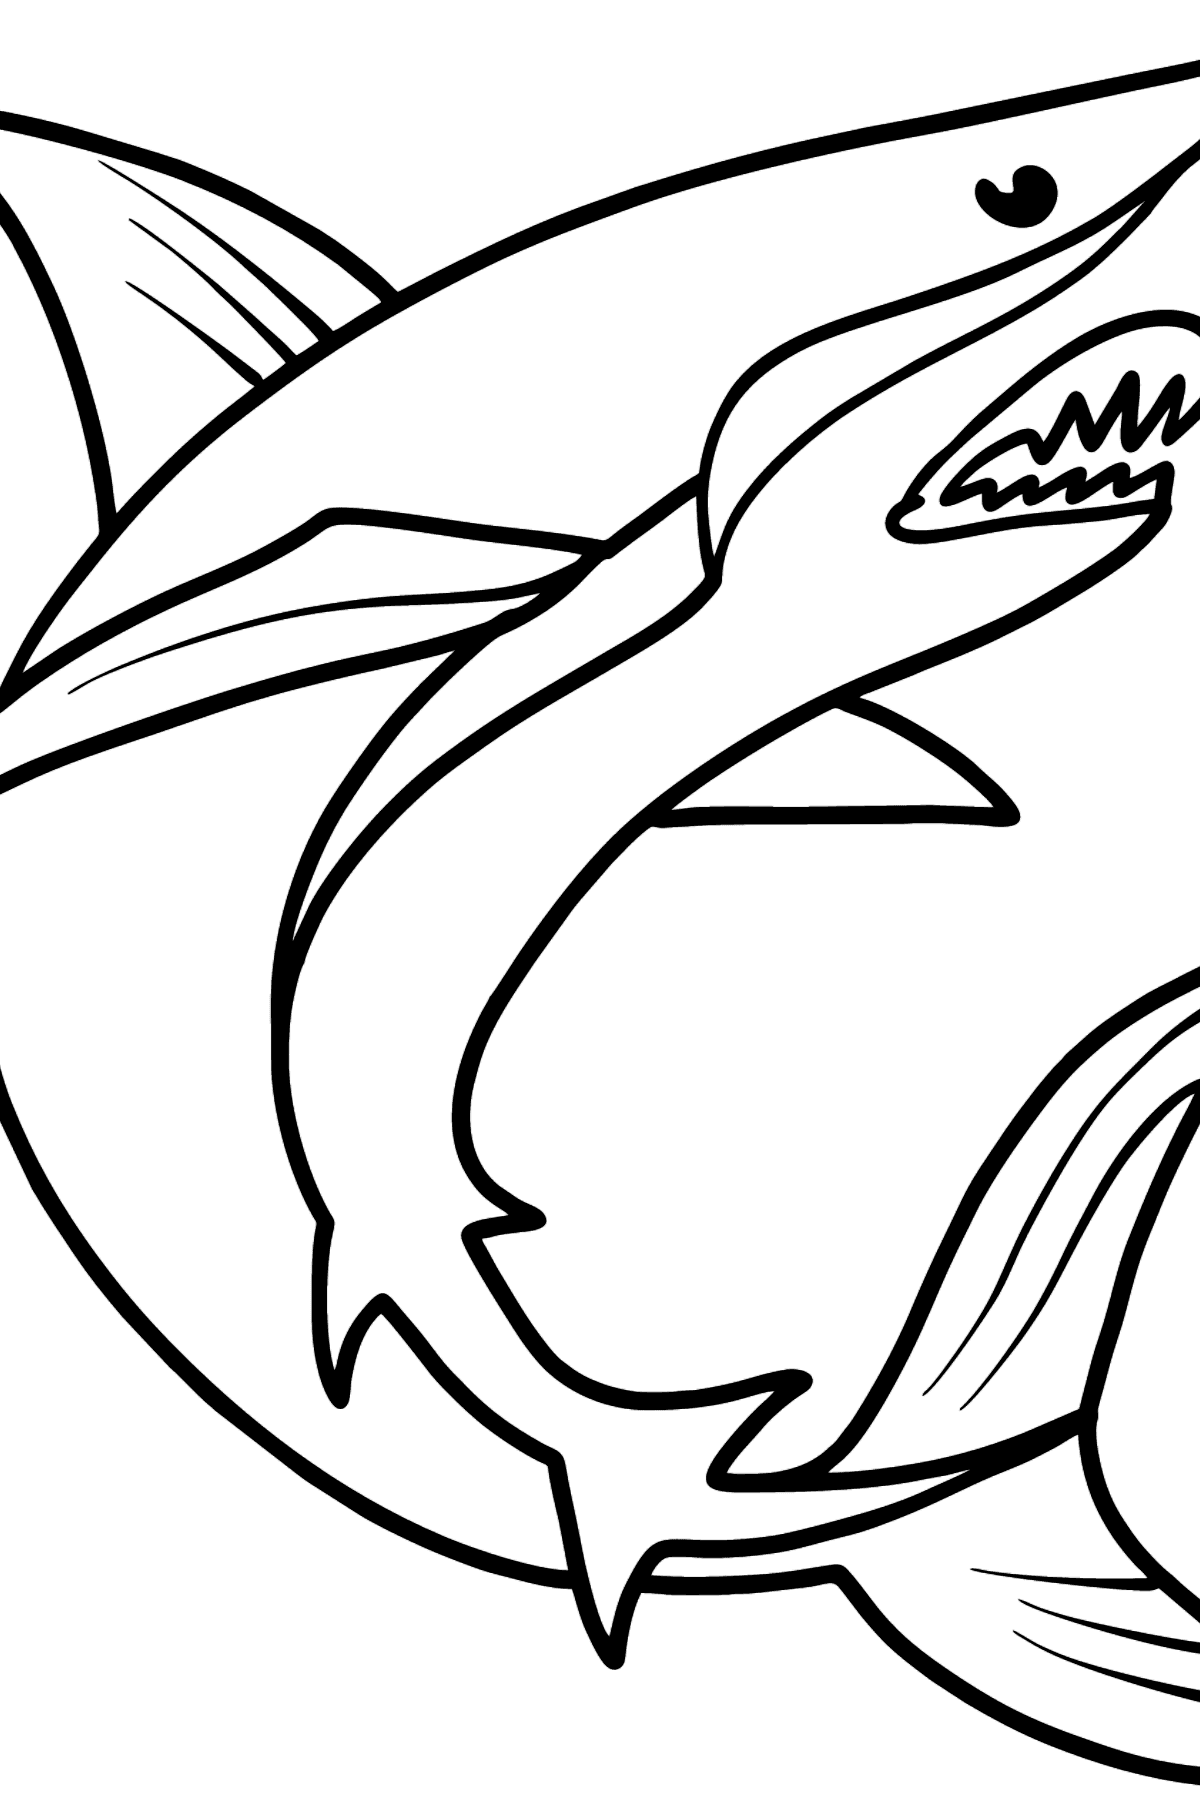 Shark coloring page - Coloring Pages for Kids